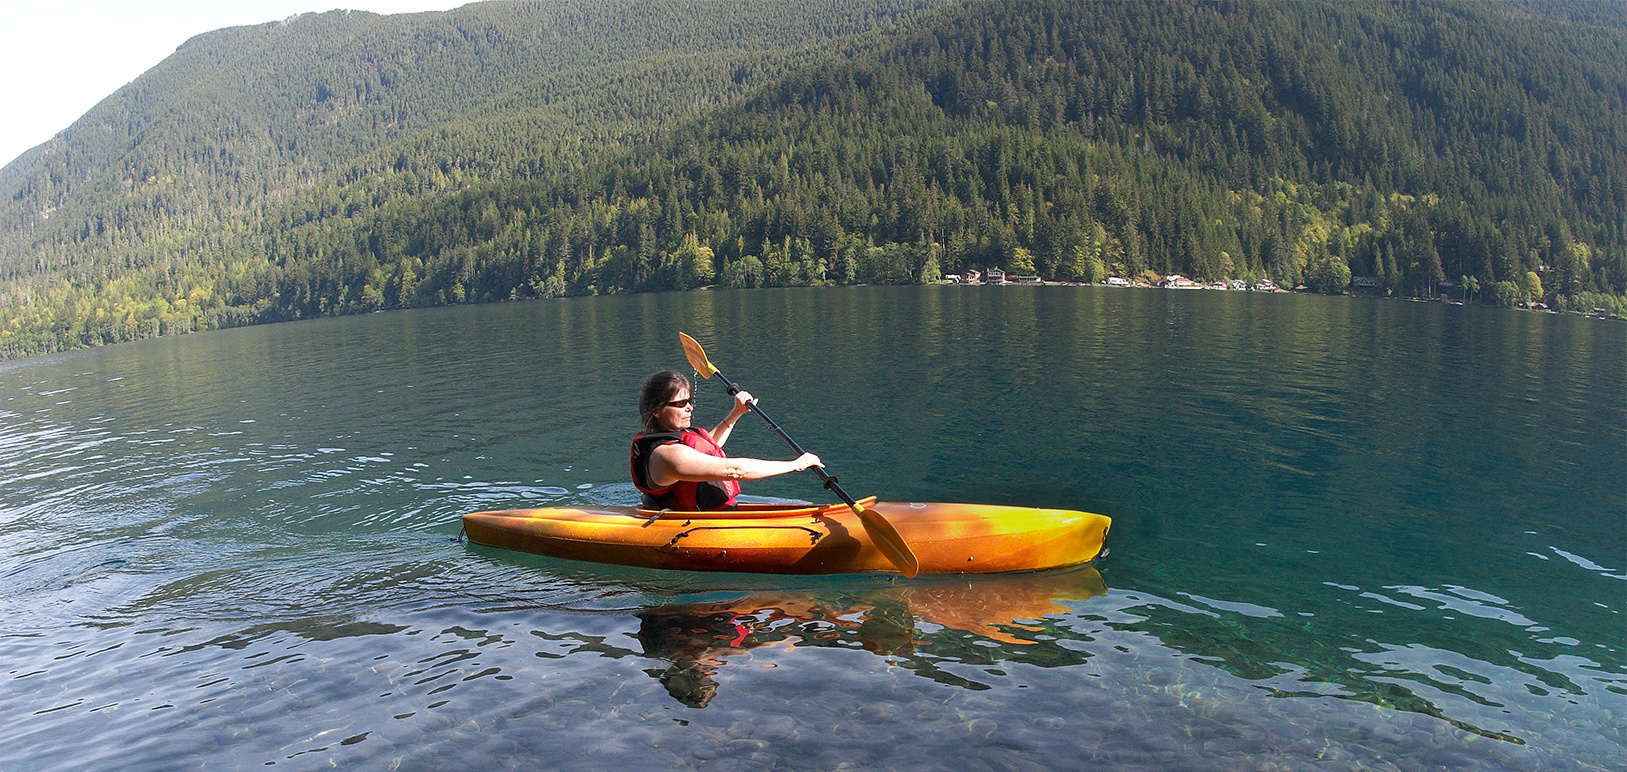 https://olympicpeninsula.org/wp-content/uploads/2018/08/kayak-on-lake-crescent-e1535428207137.png